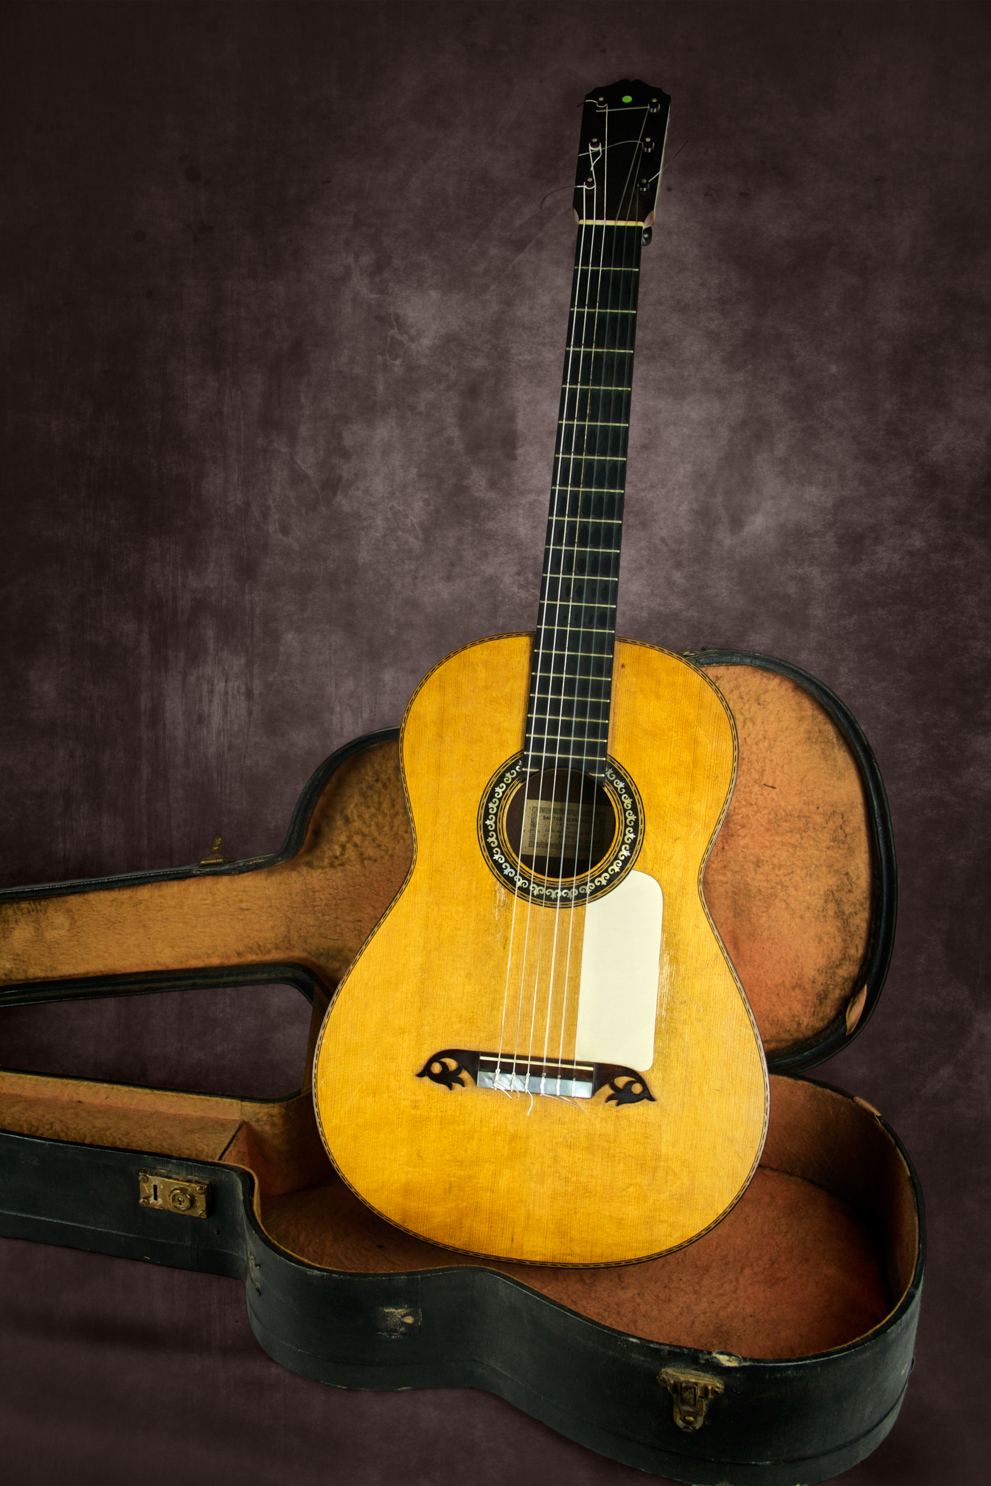 A selection of the finest guitars made by the finest Spanish craftsmen, selected with the utmost attention and care.